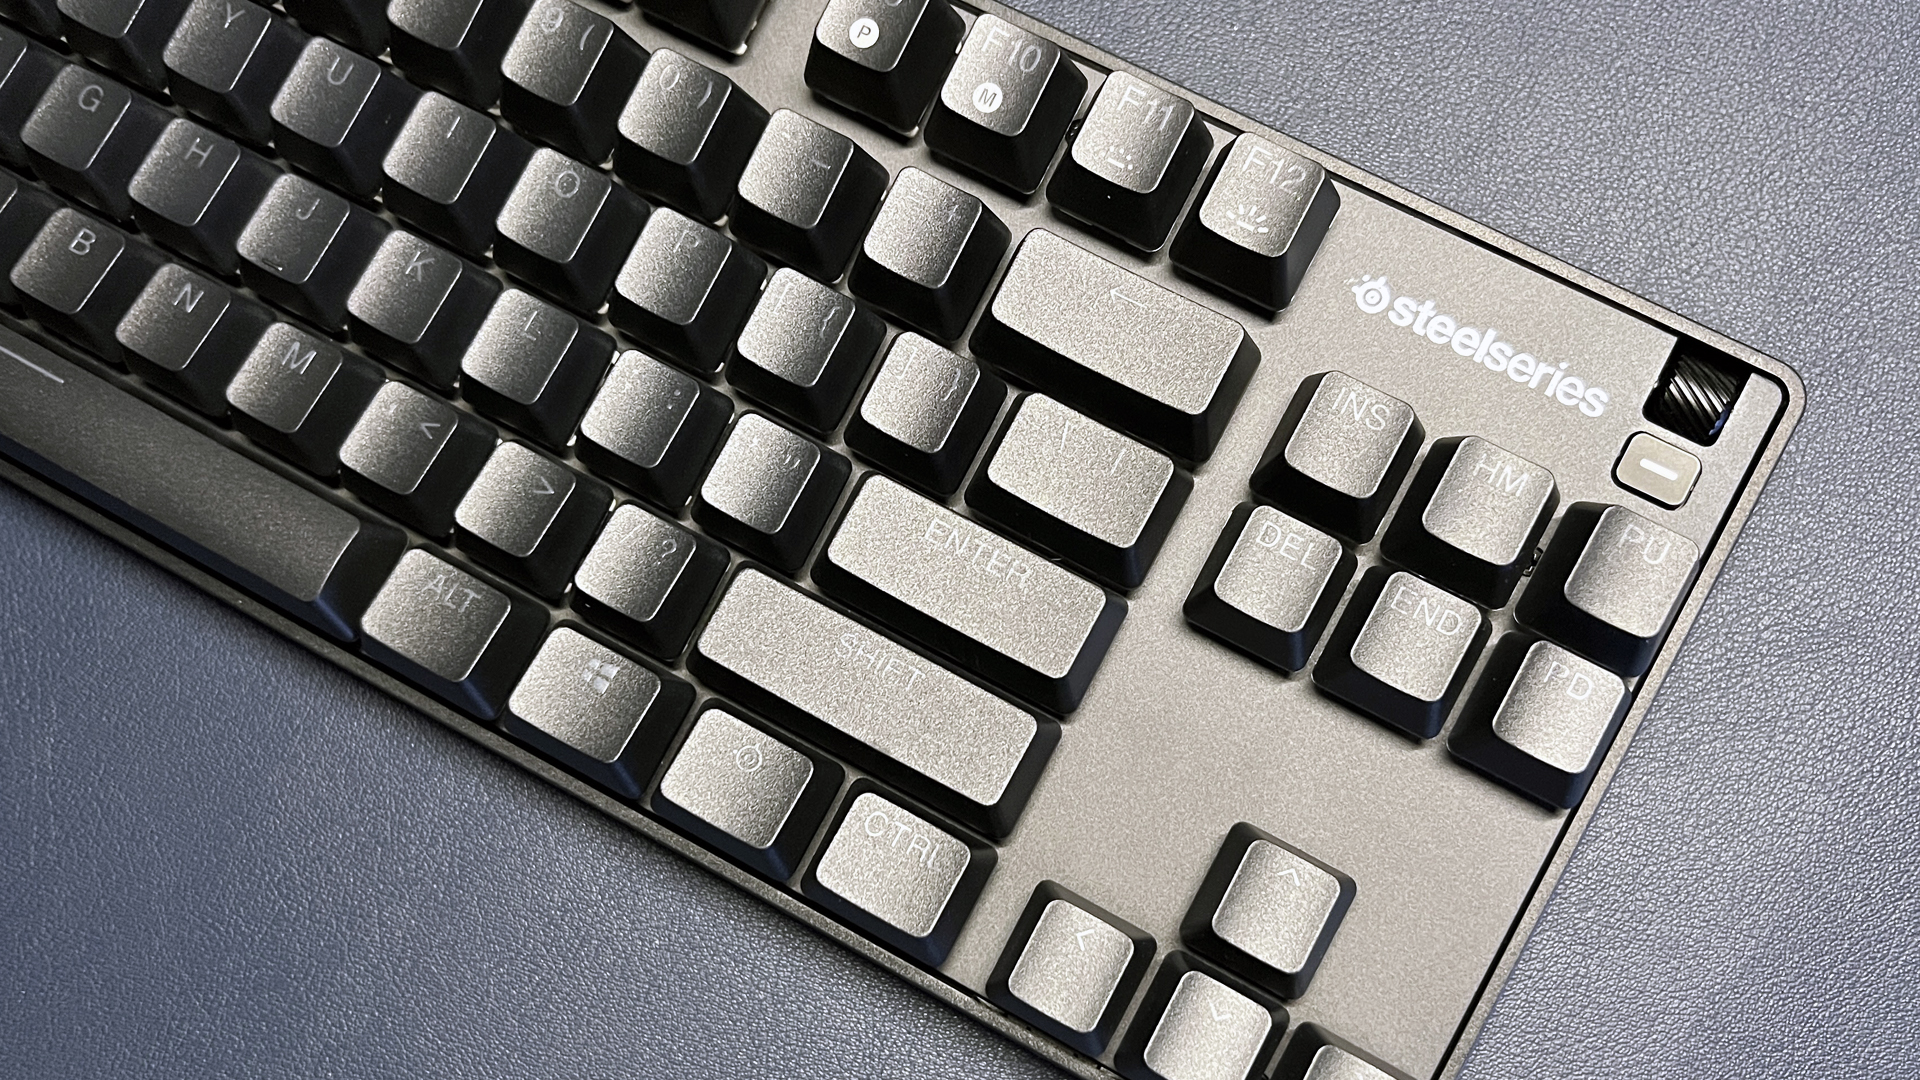 SteelSeries Apex 9 TKL Review: Hot-Swappable Optical Switches